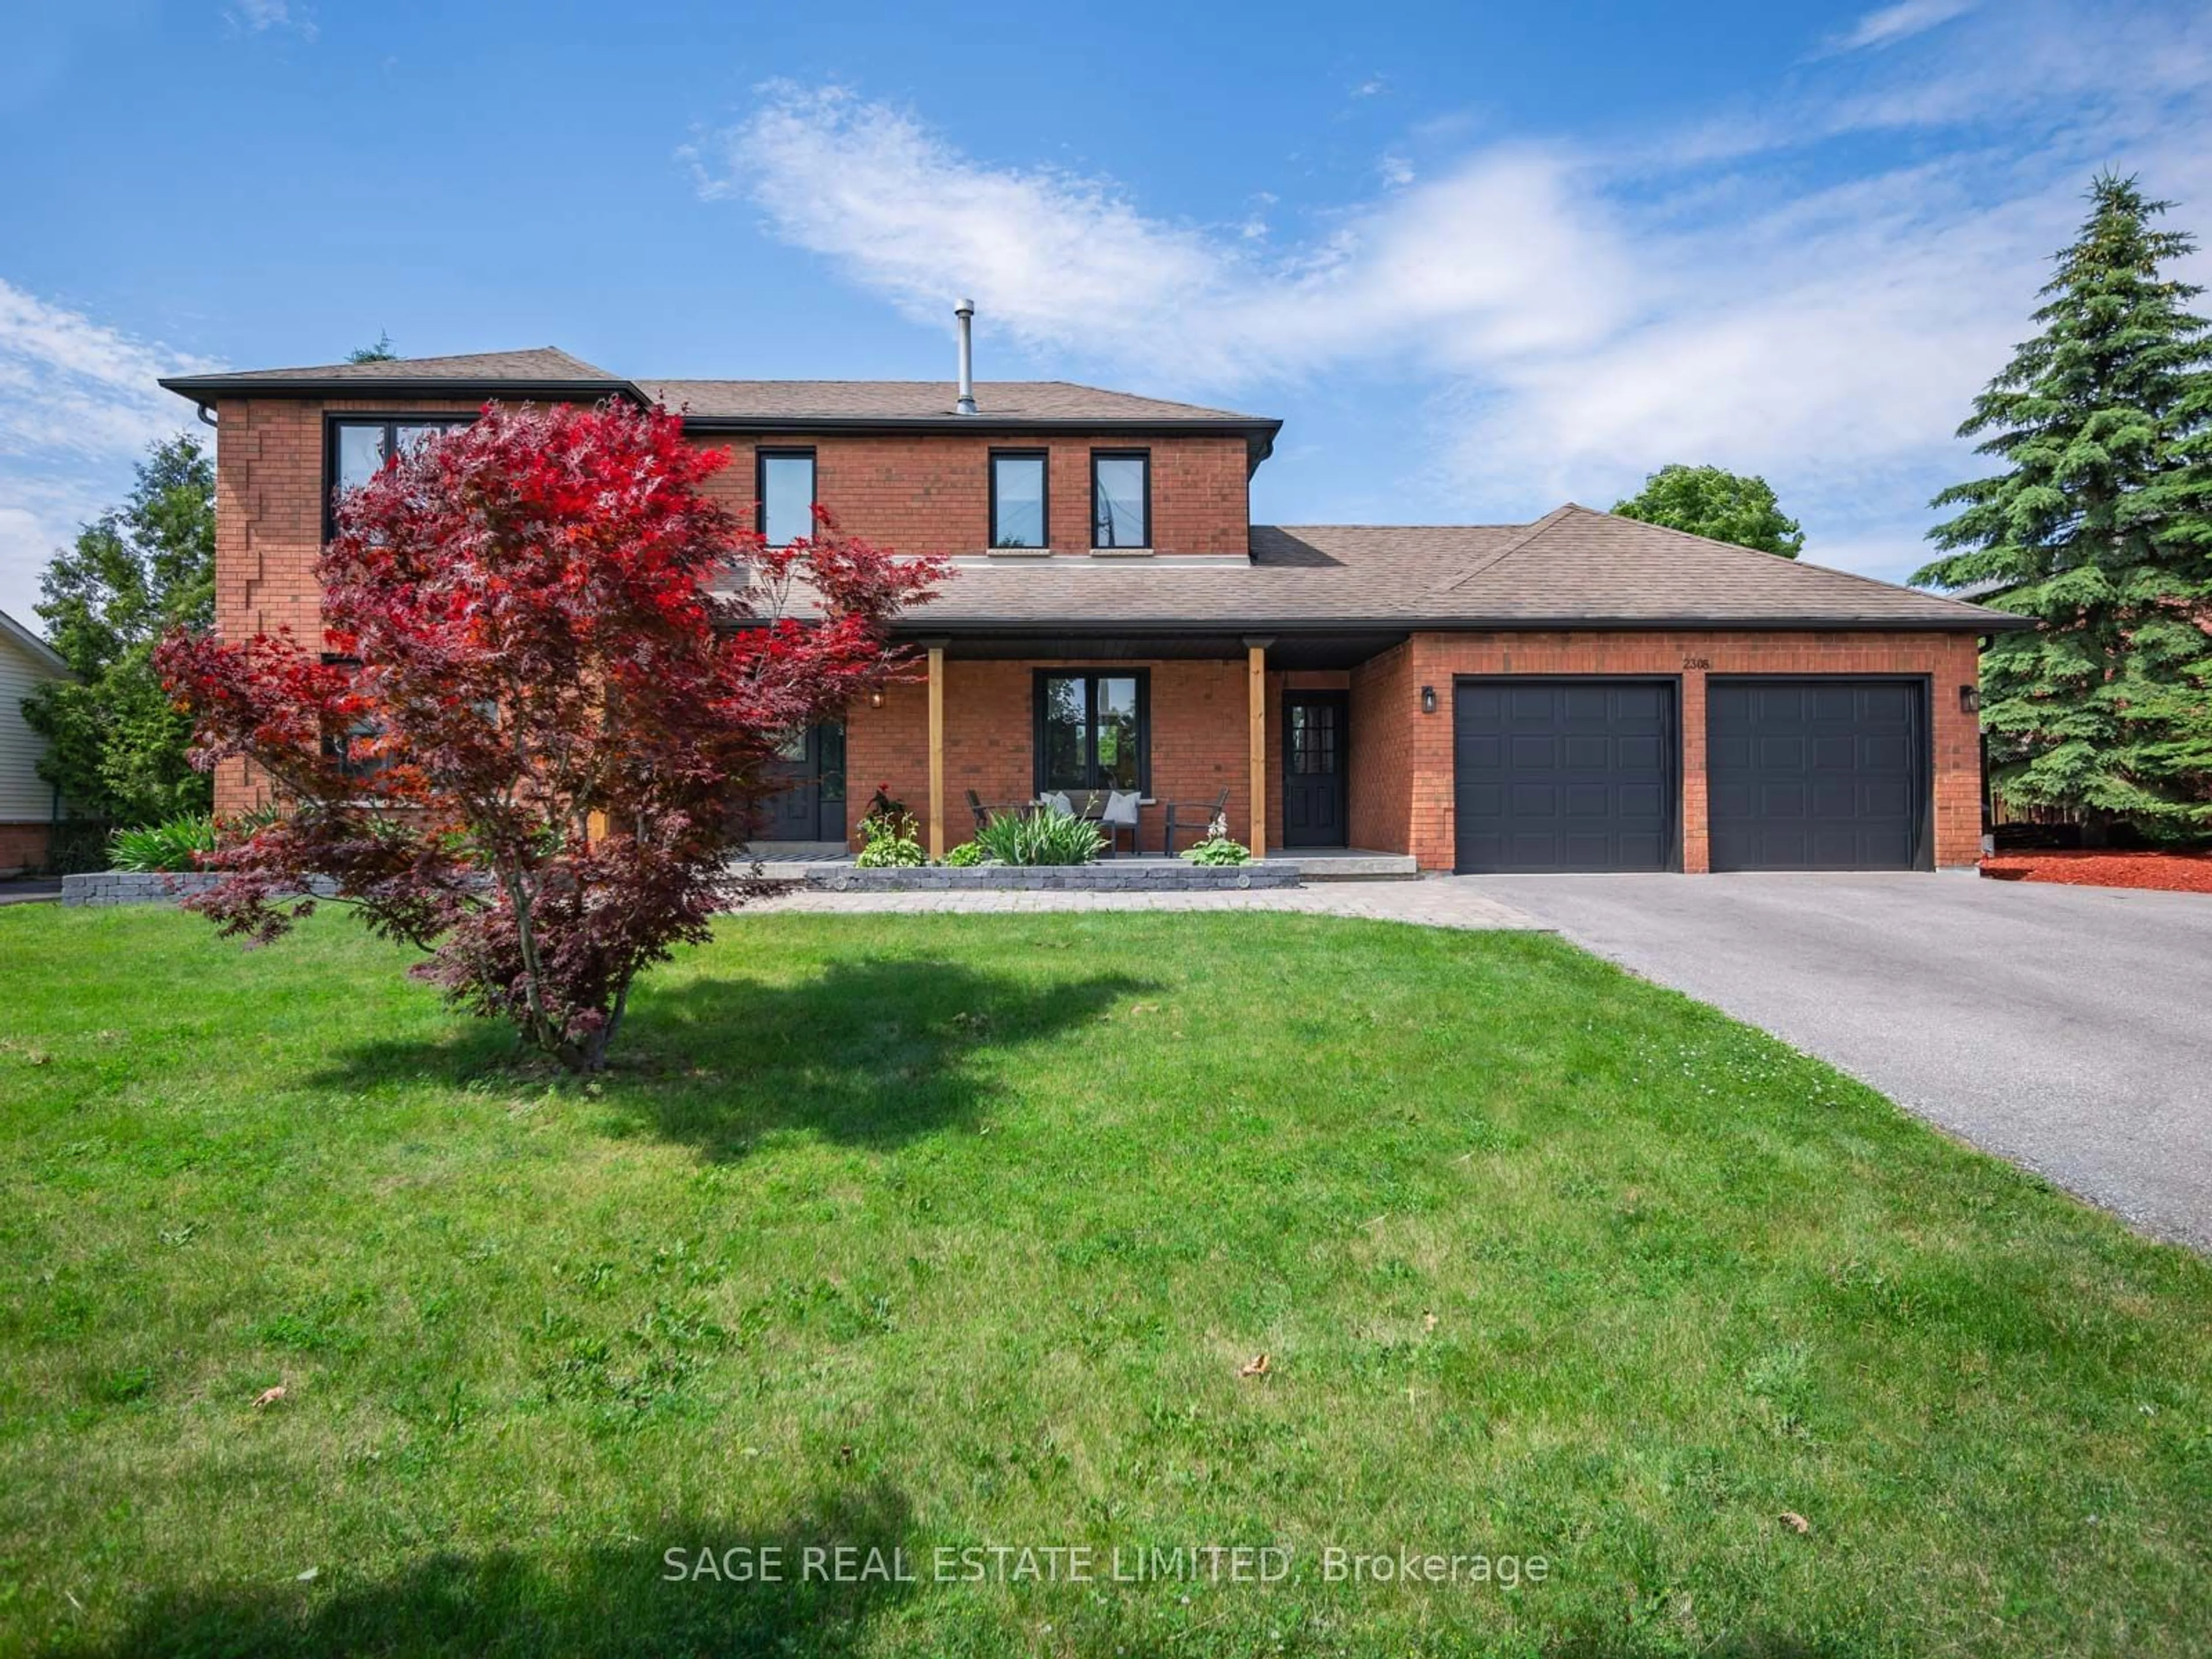 Home with brick exterior material for 2308 Victoria St, Innisfil Ontario L9S 1K5